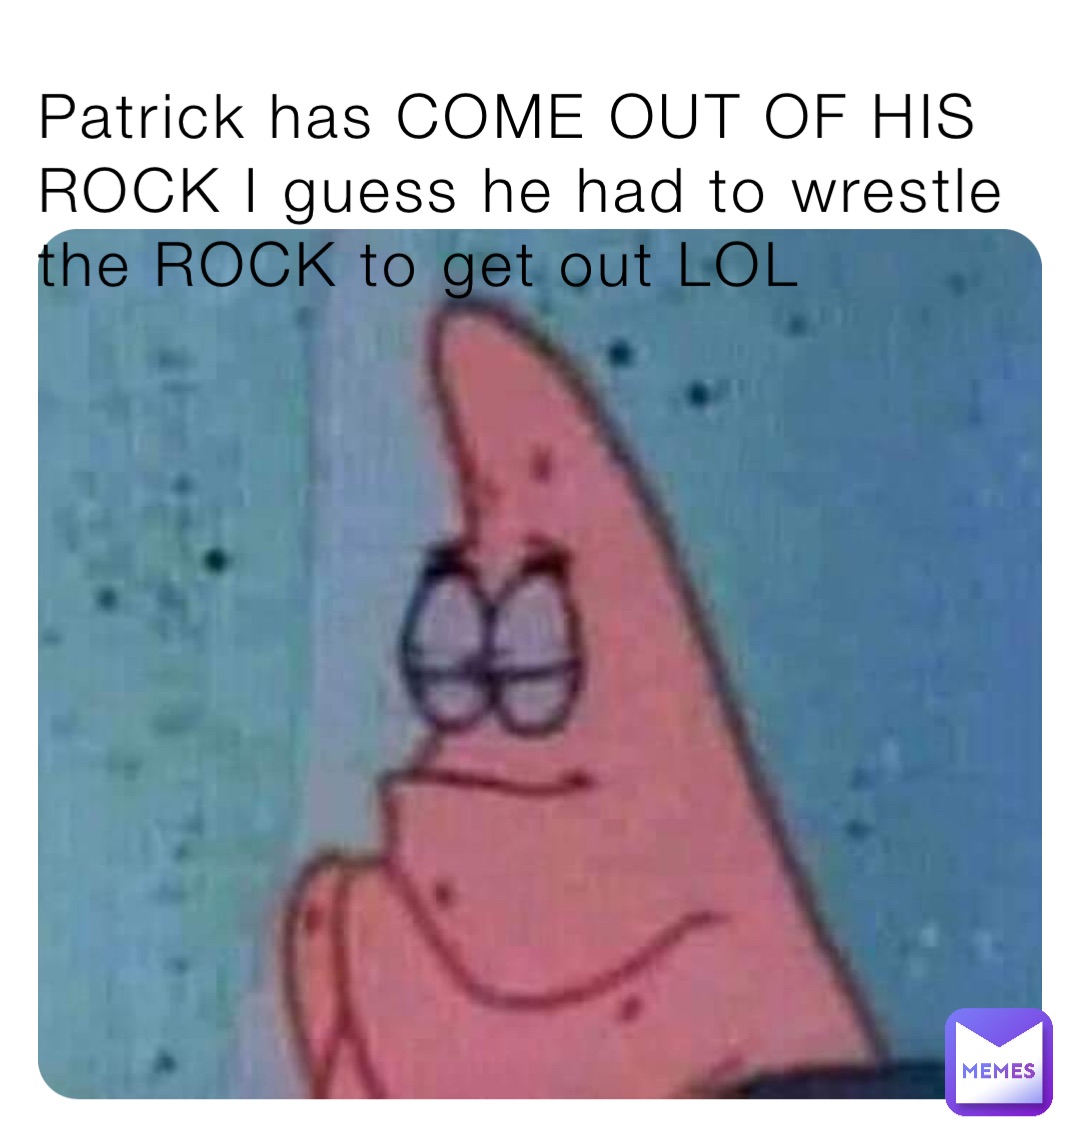 Patrick has COME OUT OF HIS ROCK I guess he had to wrestle the ROCK to get out LOL